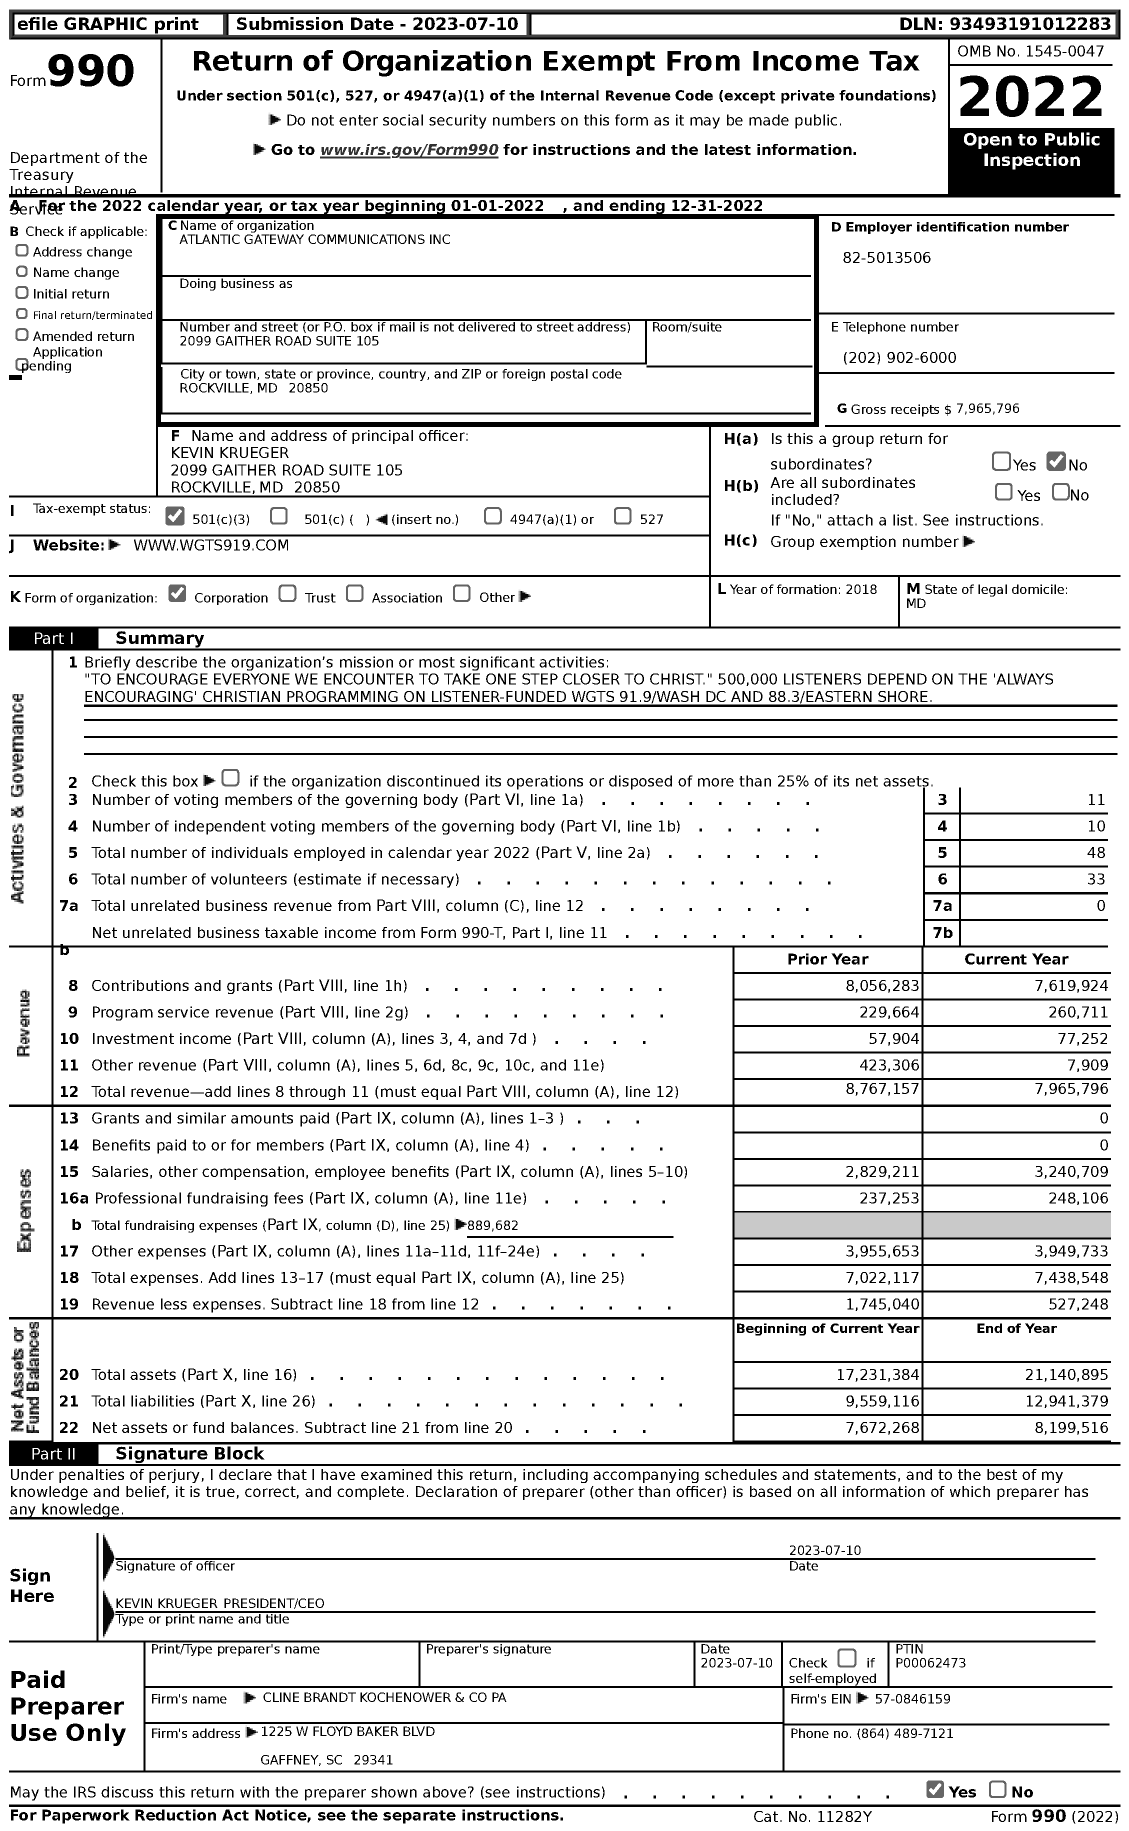 Image of first page of 2022 Form 990 for Atlantic Gateway Communications